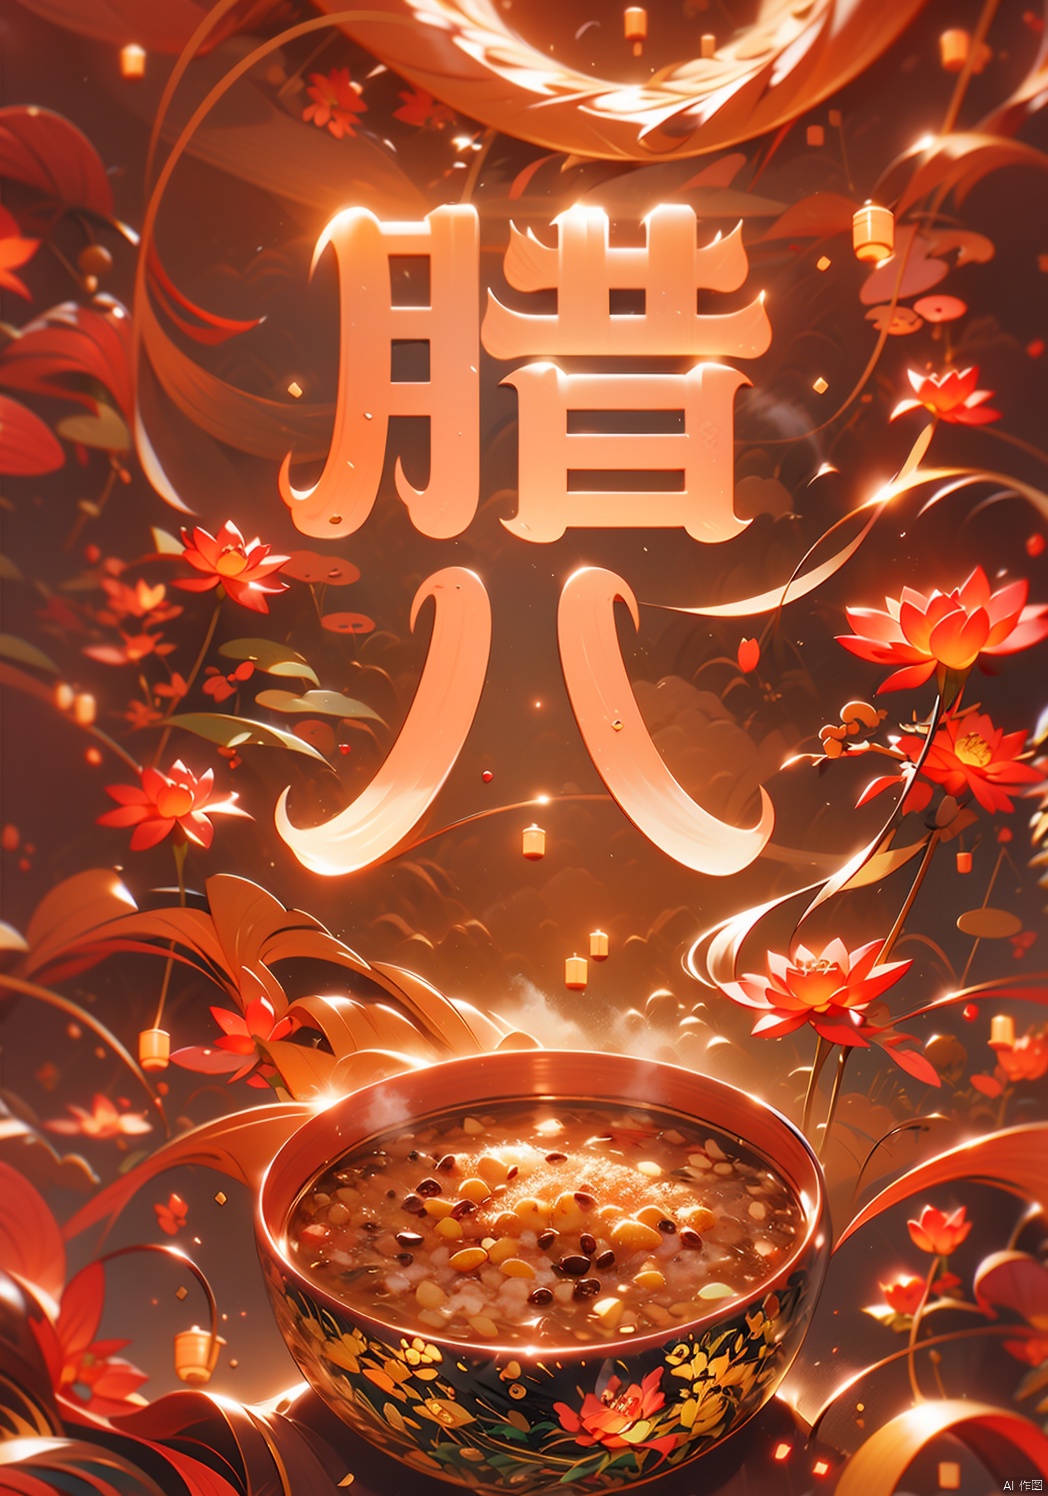 Rice, porridge, red beans, polka dots, hot air, steam, Chinese style, rice, bowl, Job's tears, lotus seeds, warm, movie texture, movie cg, 8k, excellent picture quality, great works, clear details, rich details, (\long yun heng tong\), cndstyle, chinese new year